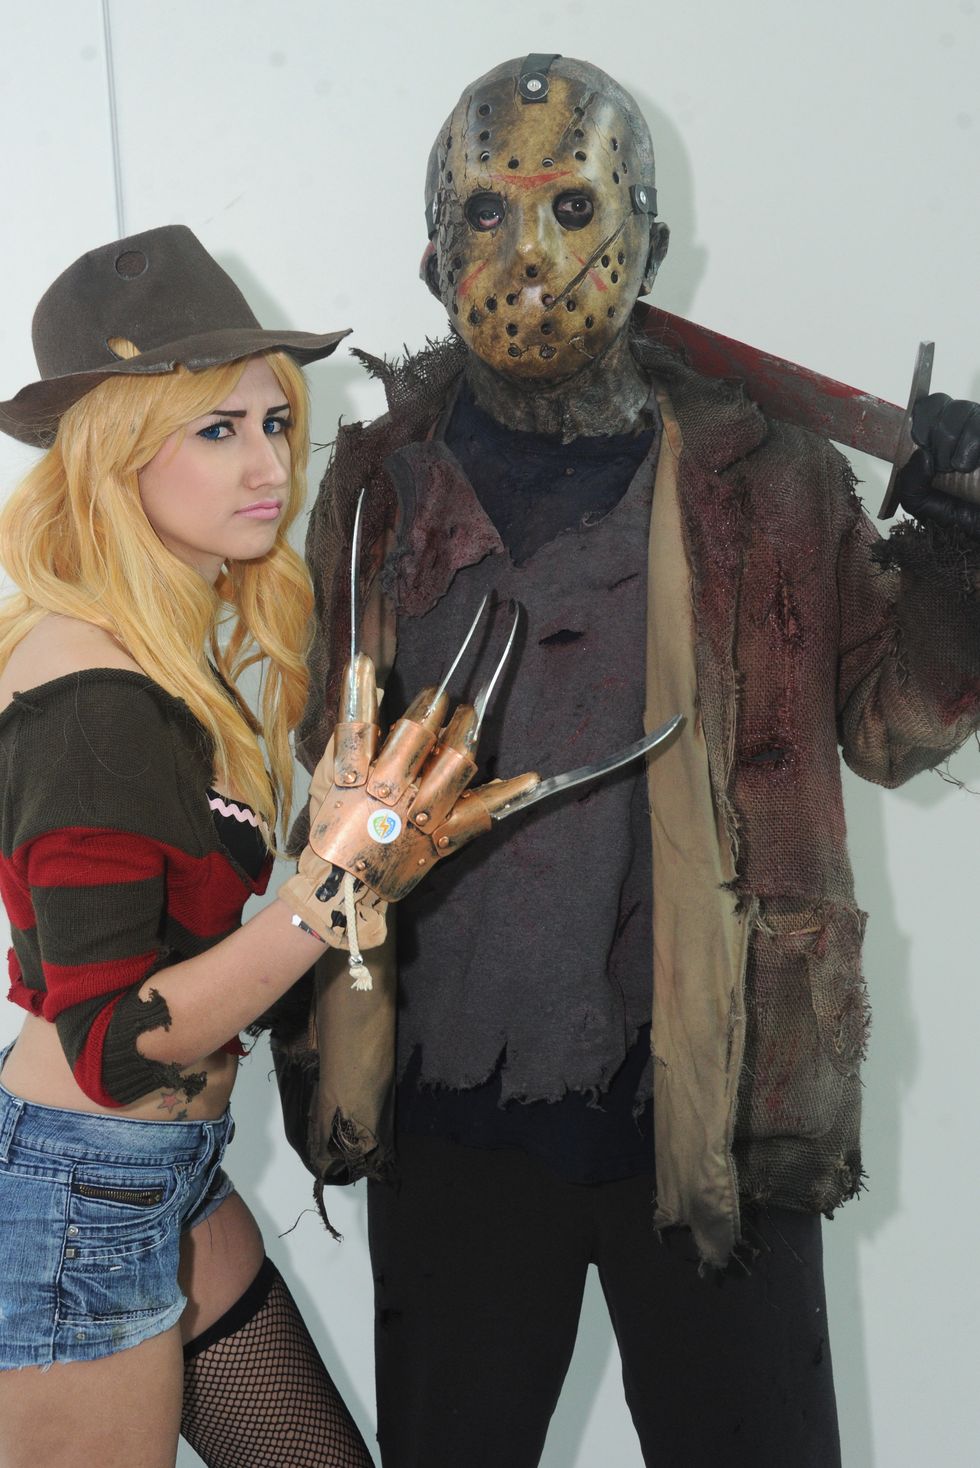 scary couples costumes freddy krueger and jason voorhees